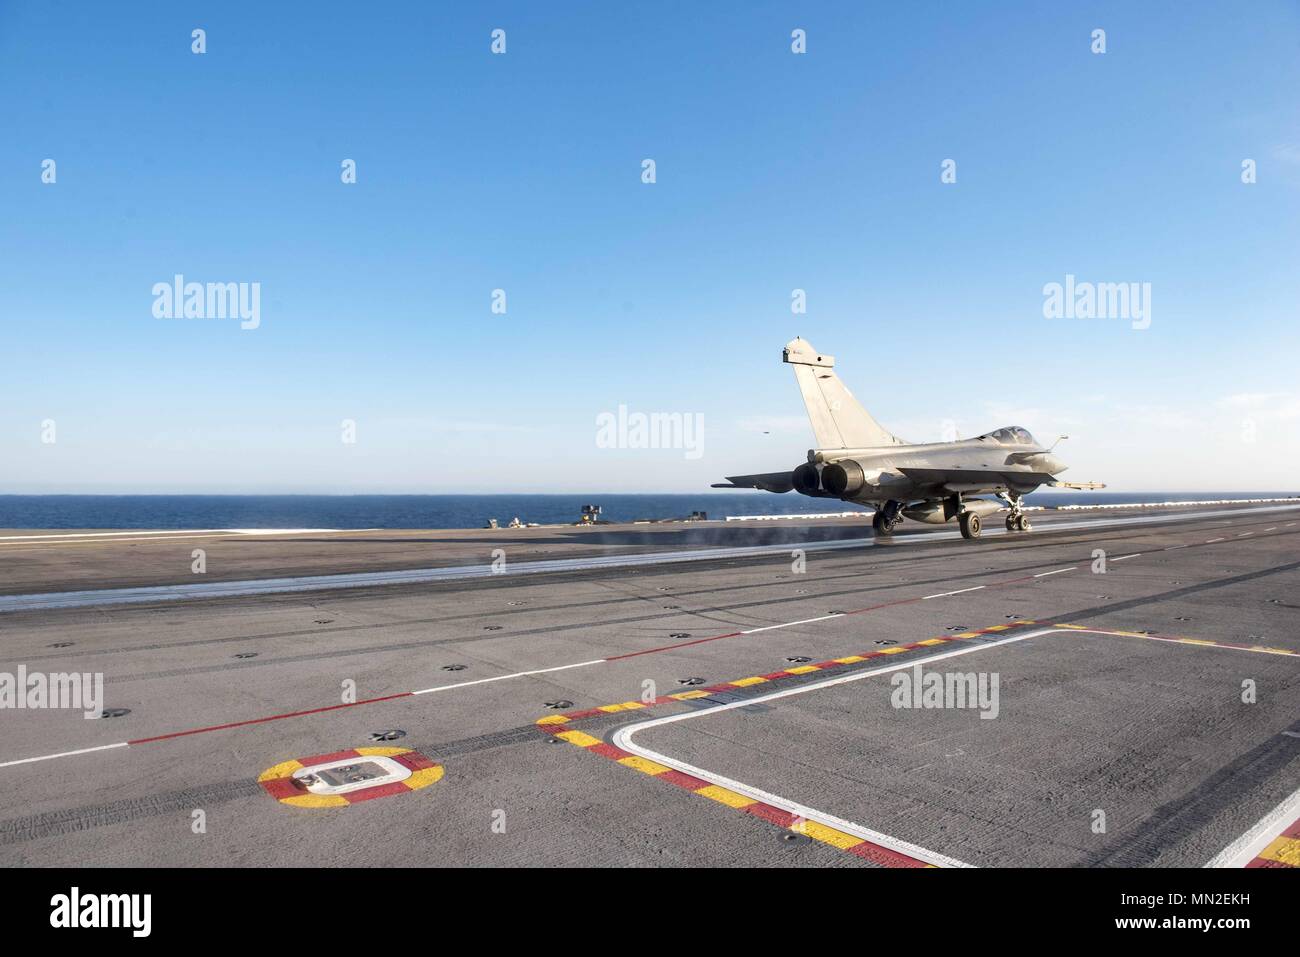 180510-N-UV609-0474 ATLANTIC OCEAN (May 10, 2018) A Rafale Marine attached to squadron 17F of the French navy launches off the flight deck of the aircraft carrier USS George H.W. Bush (CVN 77), May 10, 2018. GHWB is underway in the Atlantic Ocean conducting carrier air wing exercises with the French navy to strengthen partnerships and deepen interoperability between the two nations' naval forces. (U.S. Navy photo by Mass Communication Specialist 2nd Class David Mora Jr.). () Stock Photo